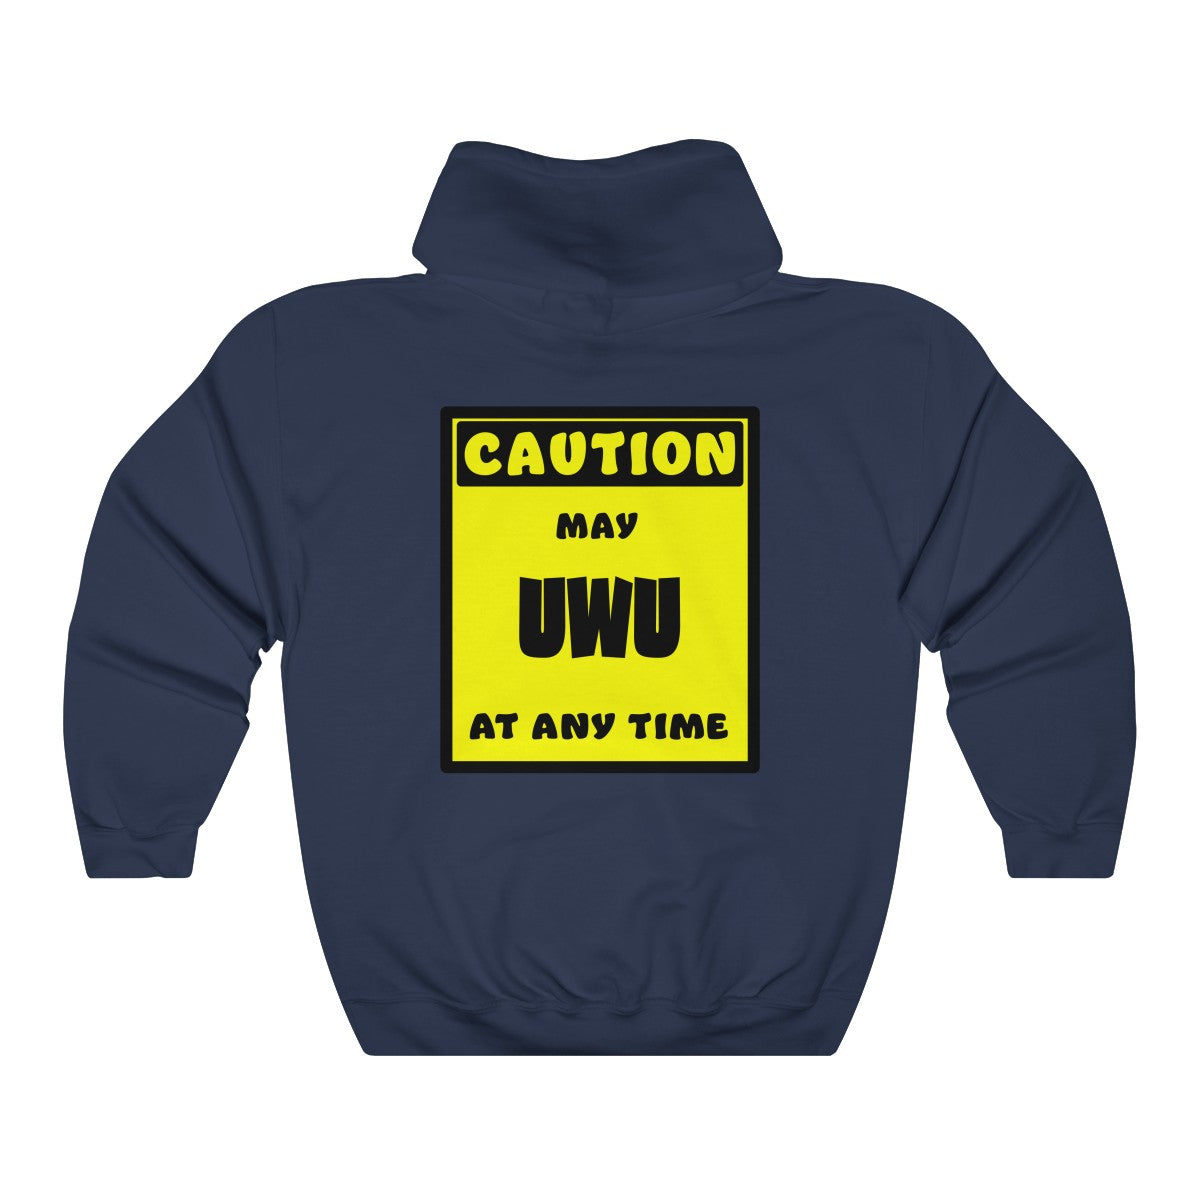 CAUTION! May UWU at any time! - Hoodie Hoodie AFLT-Whootorca Navy Blue S 